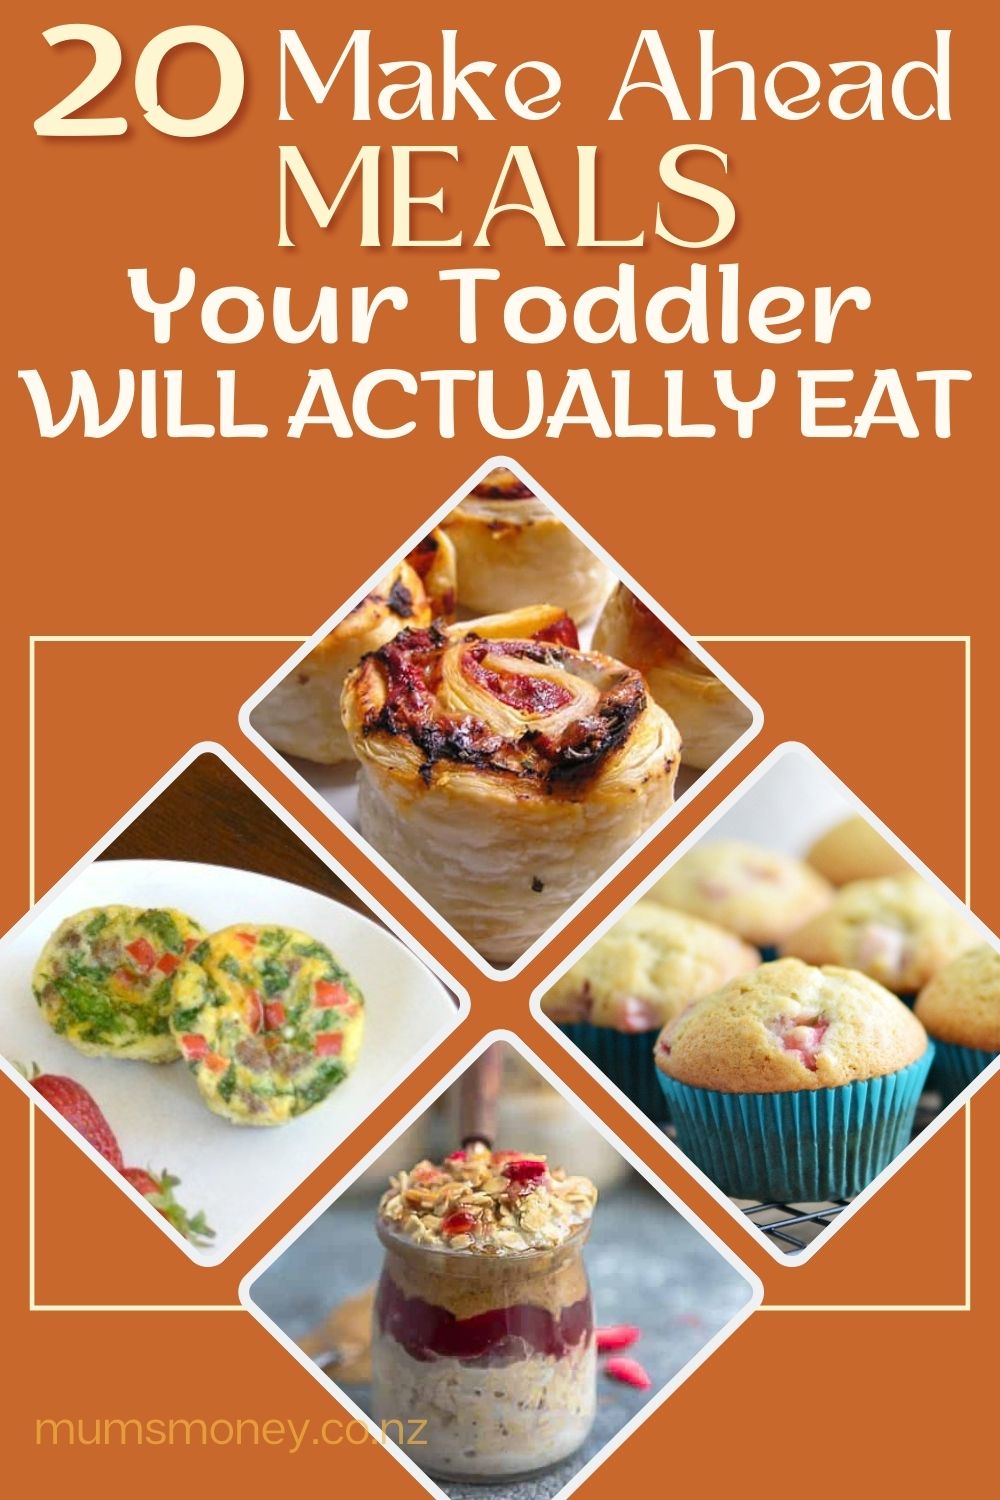 20 Make Ahead Meals Your Toddler Will Actually Eat Pin Image